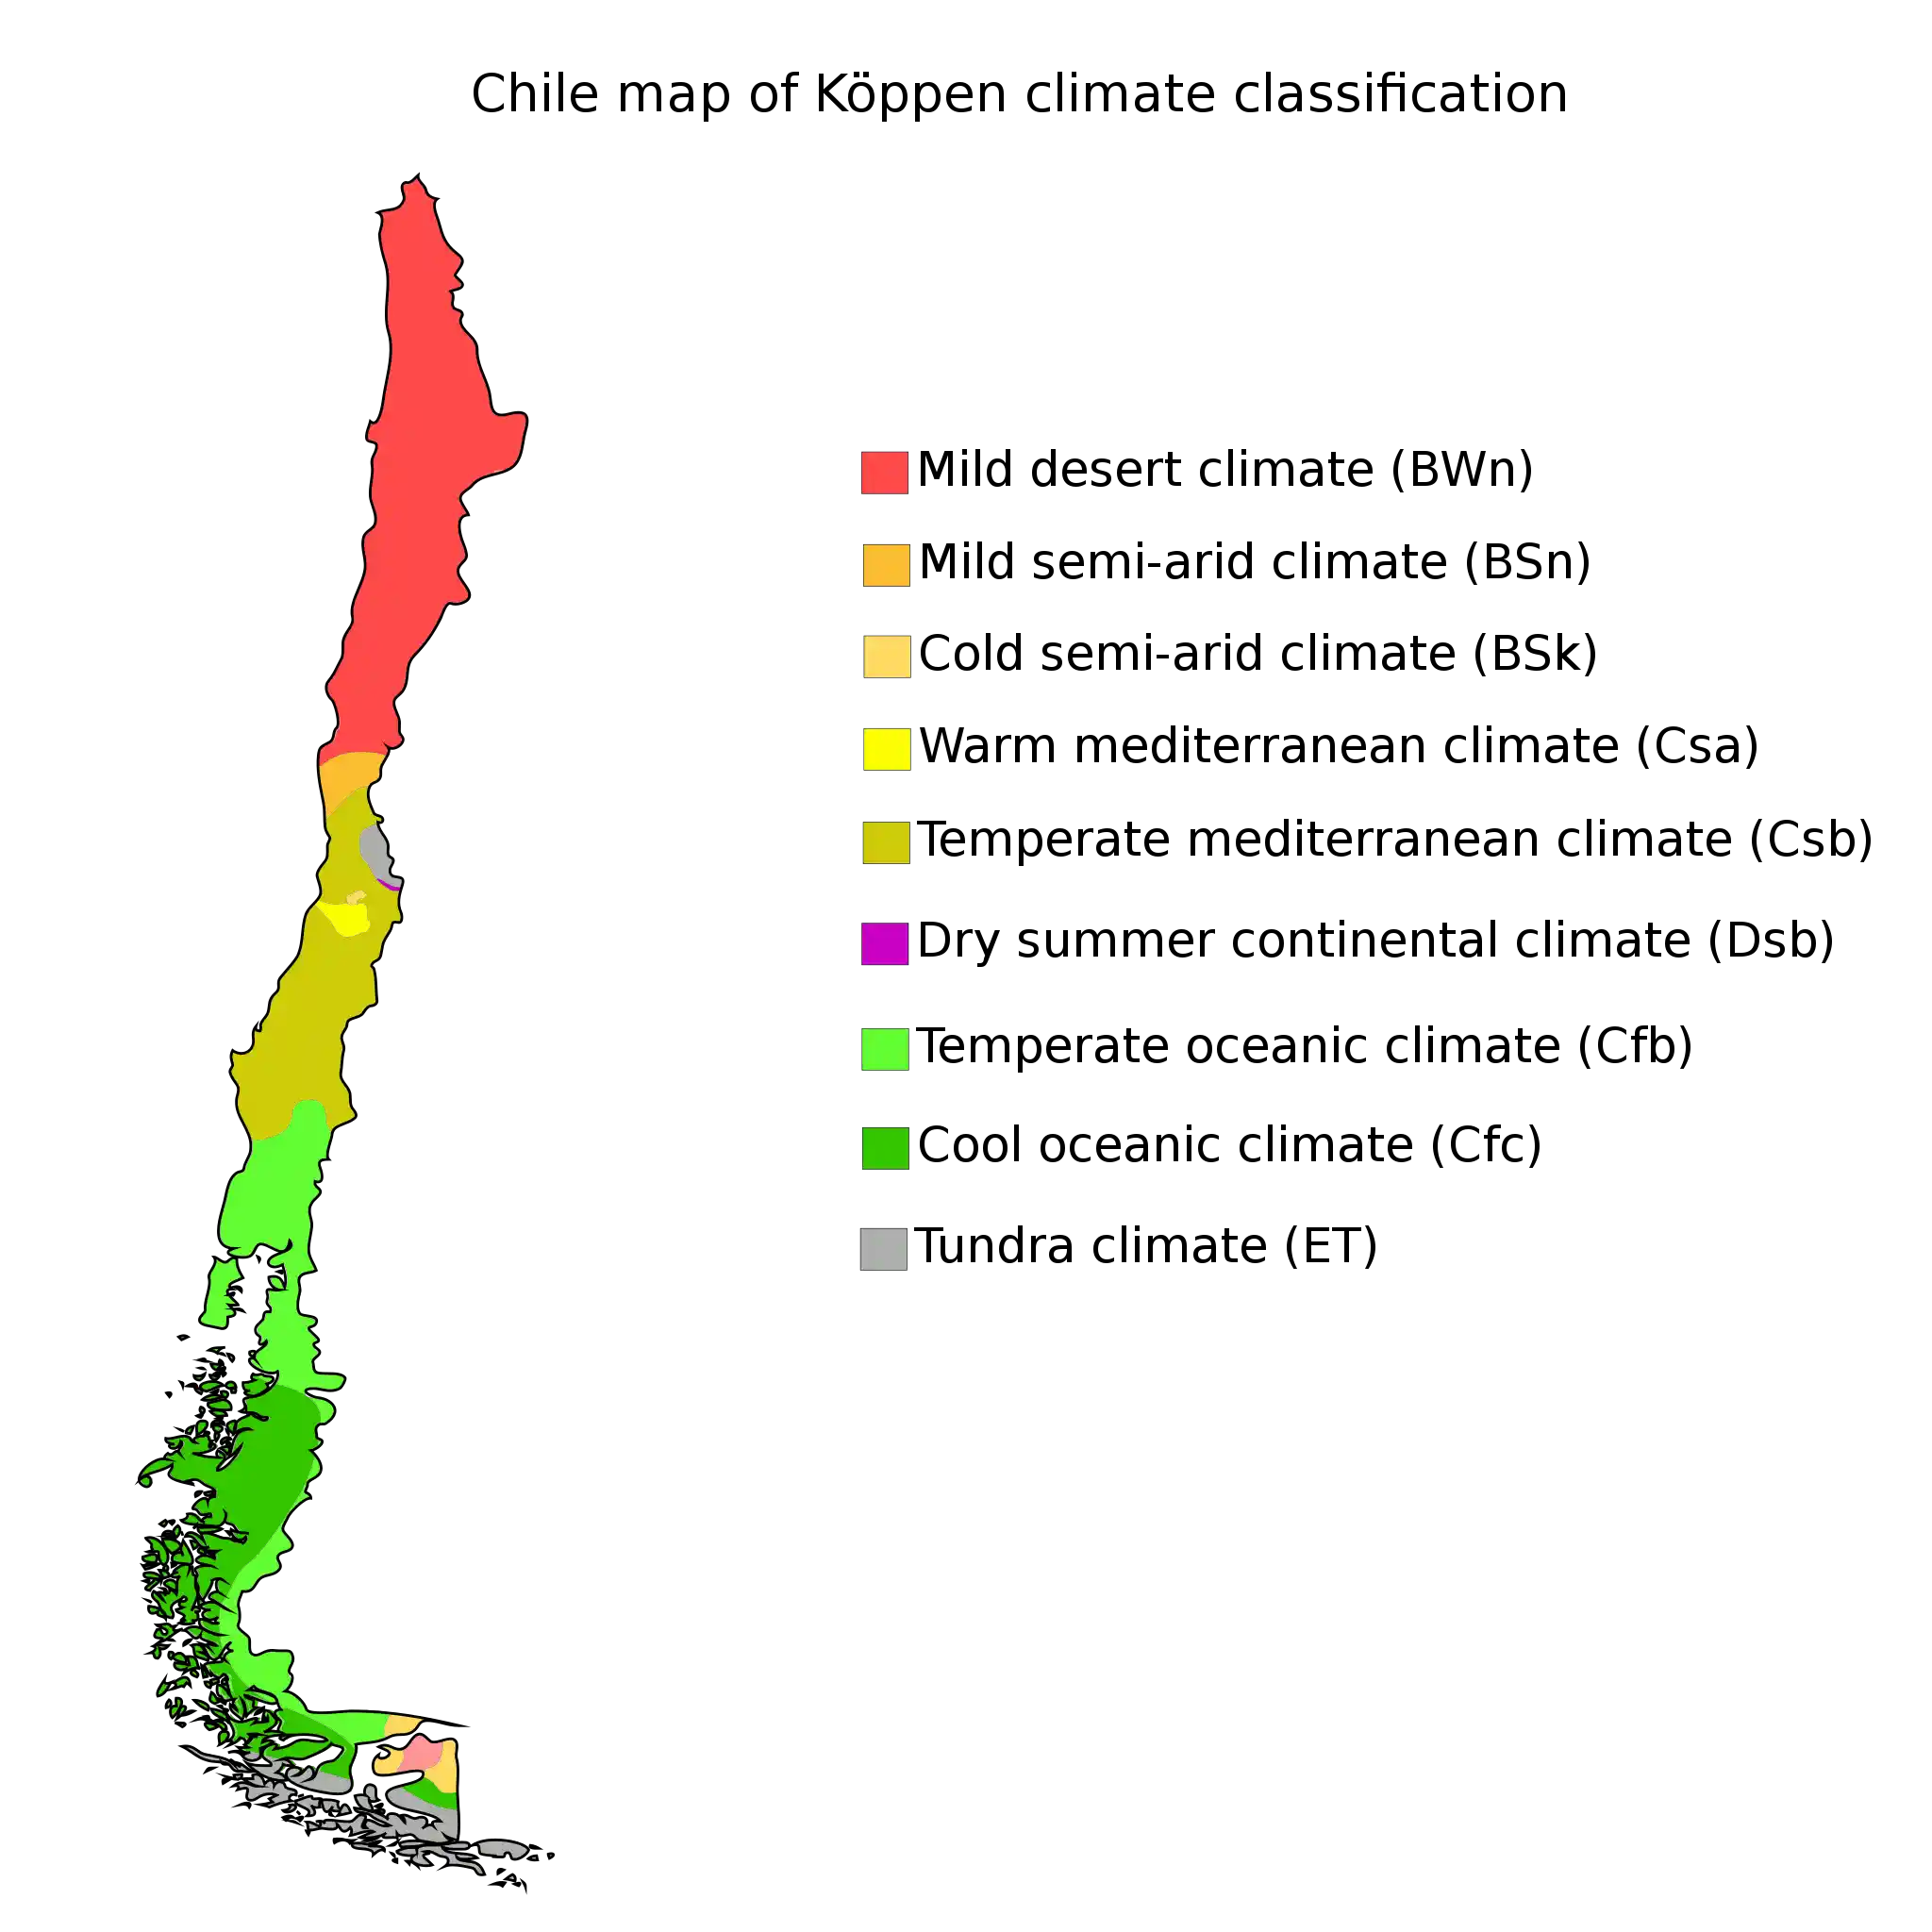 Chile_map_of_Köppen_climate_classification_with_new_classification_types.svg.png